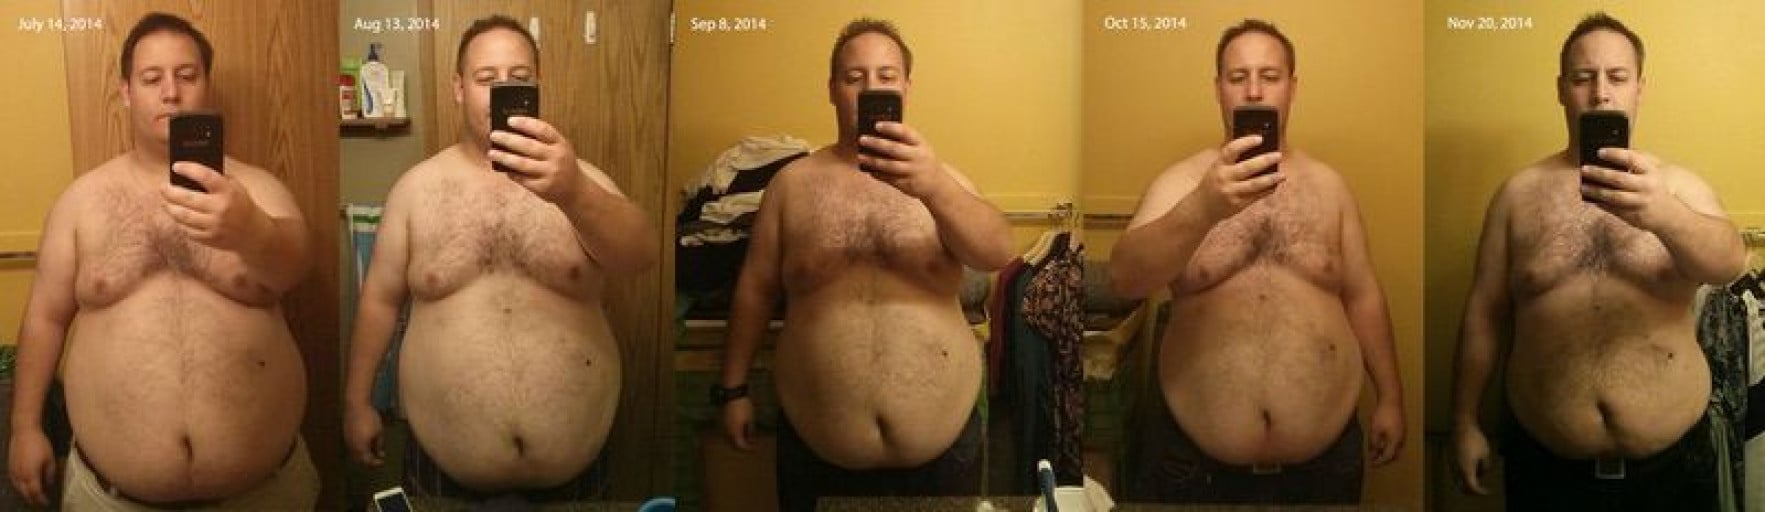 A before and after photo of a 5'7" male showing a weight reduction from 310 pounds to 264 pounds. A respectable loss of 46 pounds.